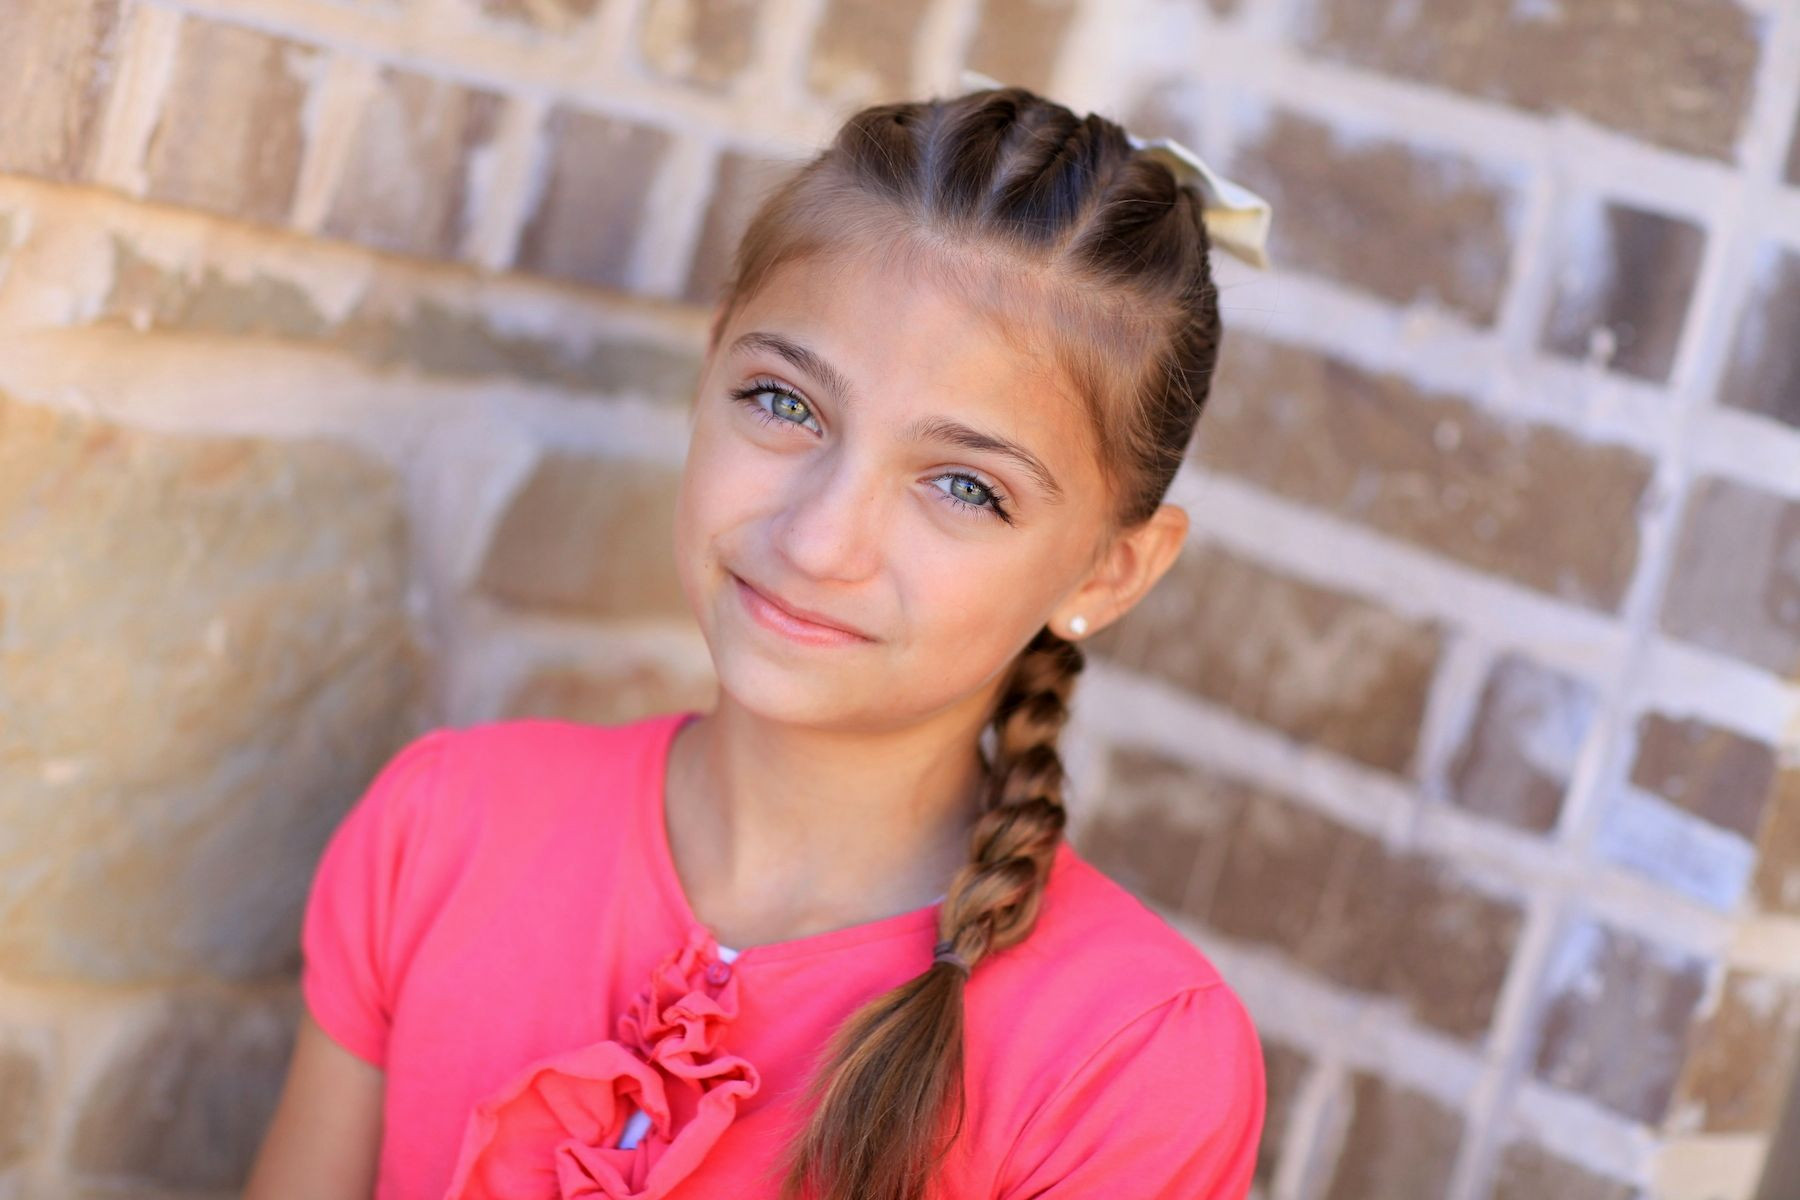 Hairstyles For 9 Year Olds Girl
 Check out these 10 great Hairstyles for 9 yr old girls